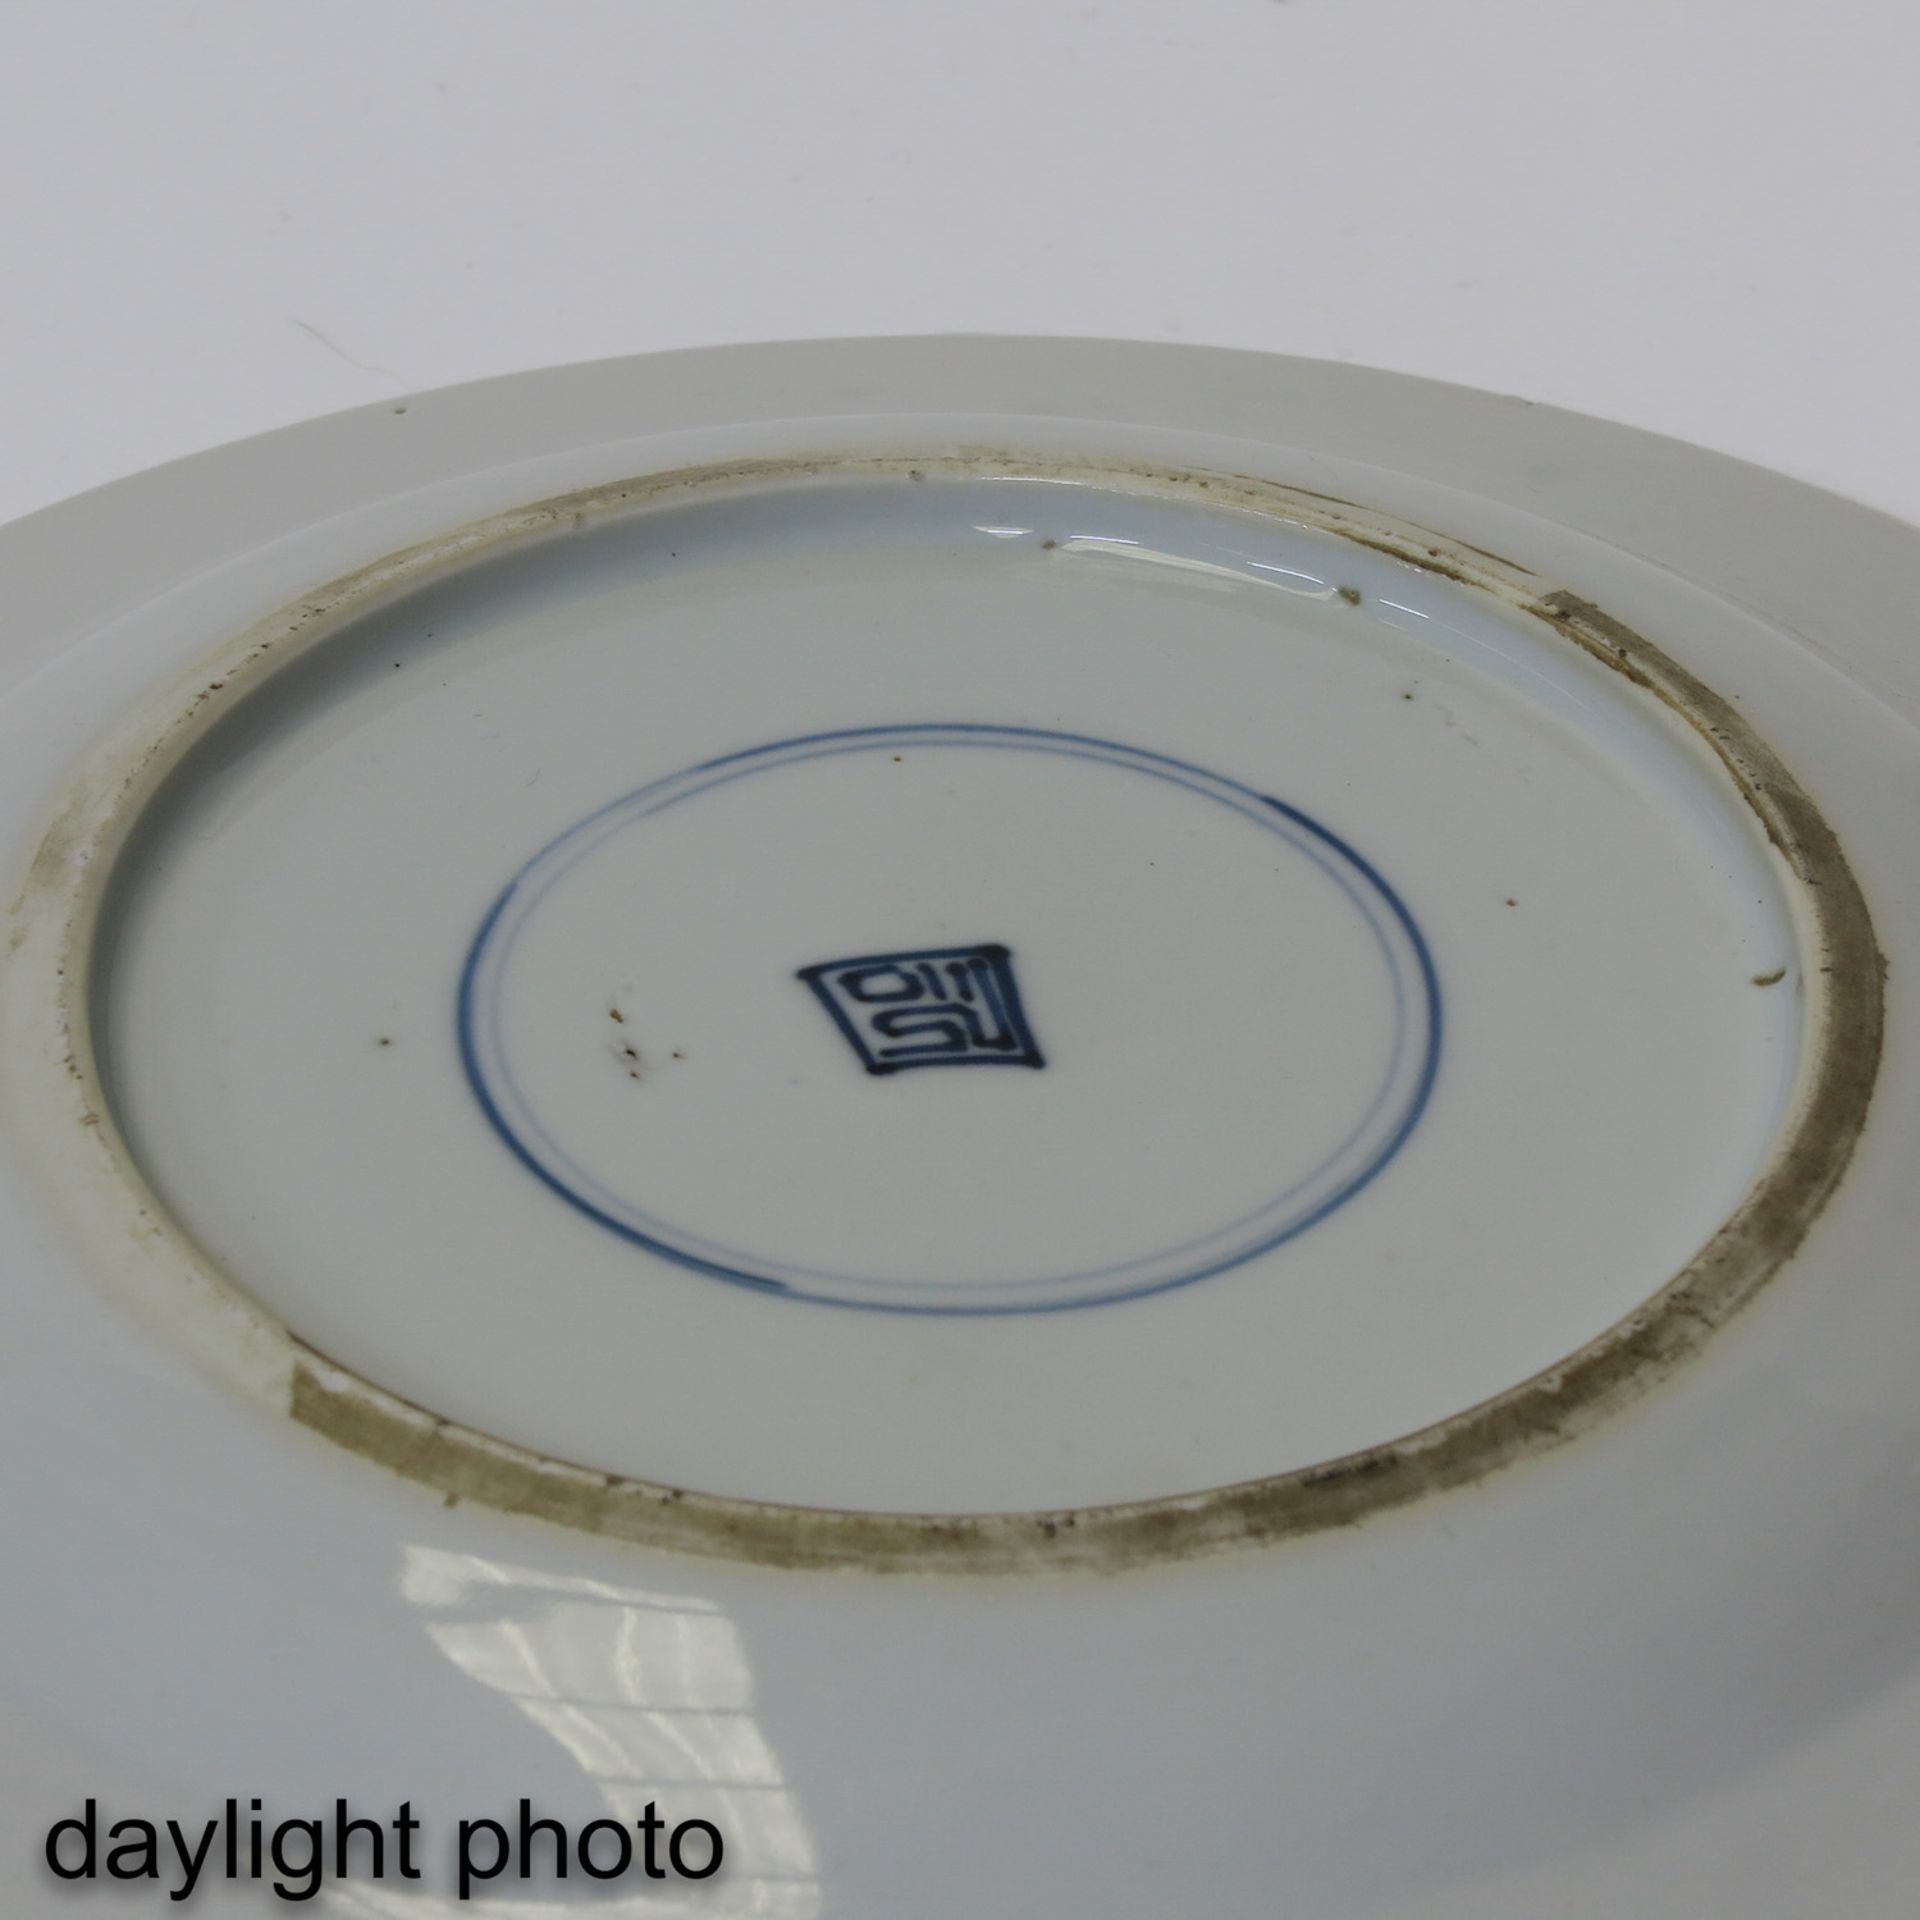 A Blue and White Plate - Image 4 of 6